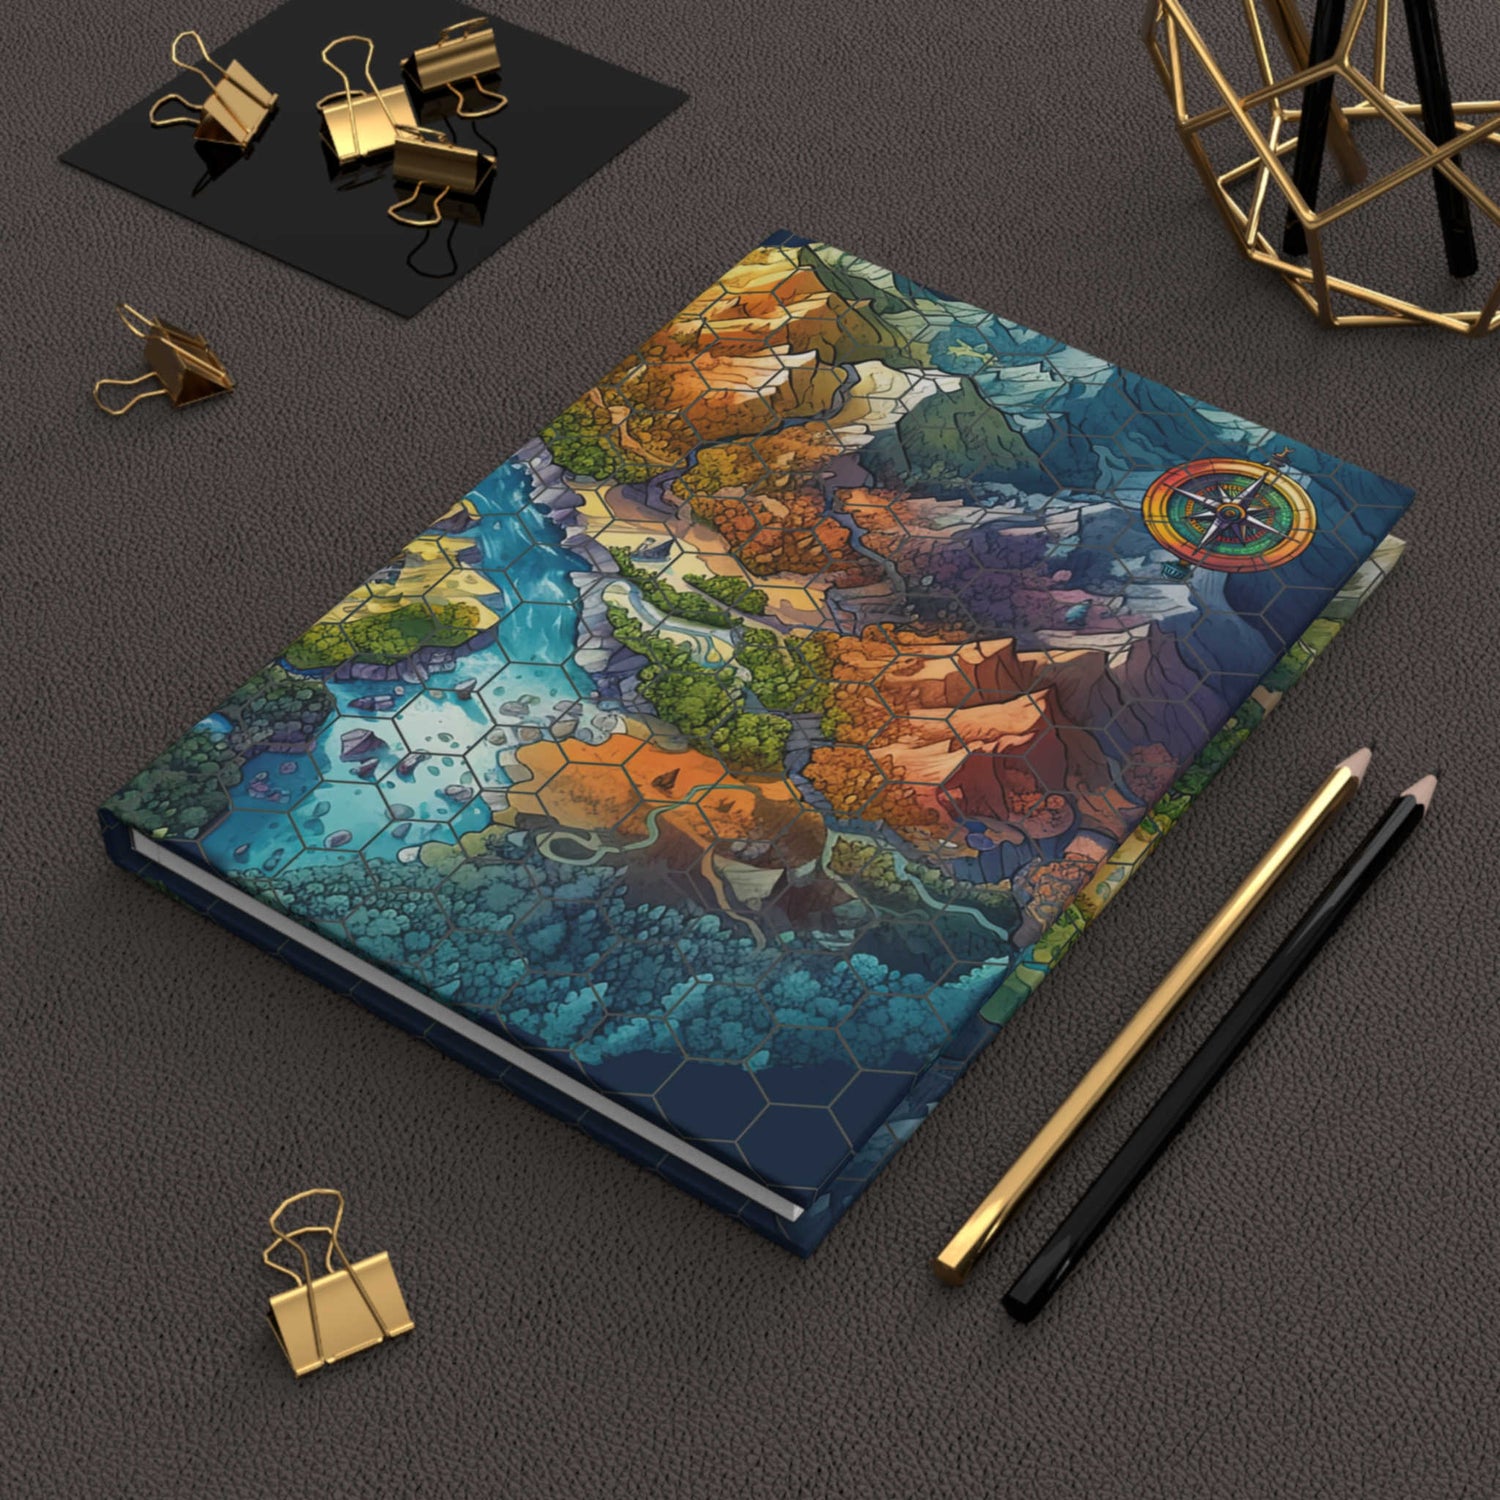 Image depicts a hardcover journal sitting on top of a desk. Journal design features a colorful fantasy map with an octagon overlay and a compass marker in the upper right.